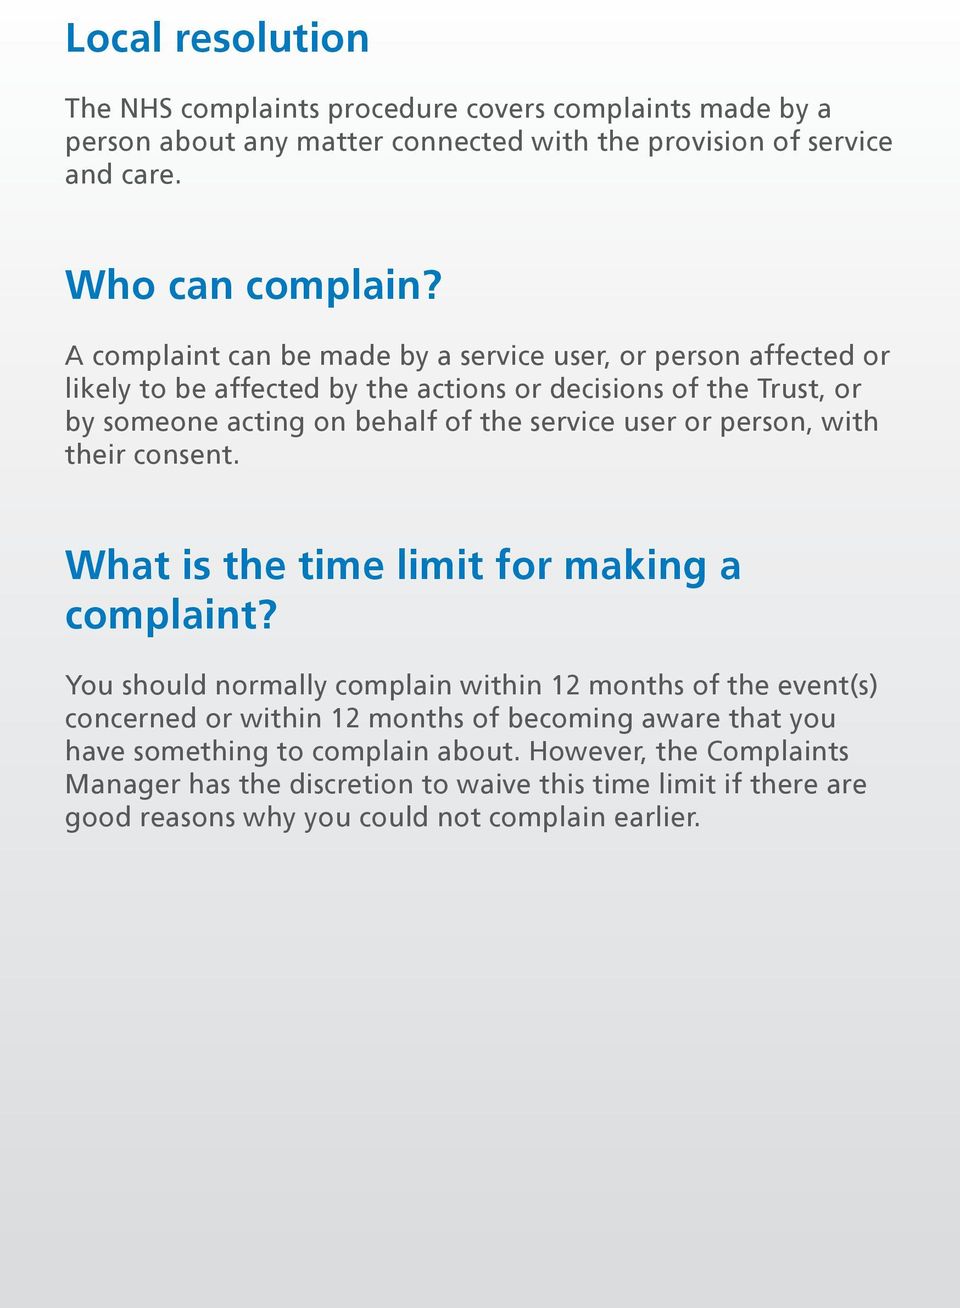 user or person, with their consent. What is the time limit for making a complaint?